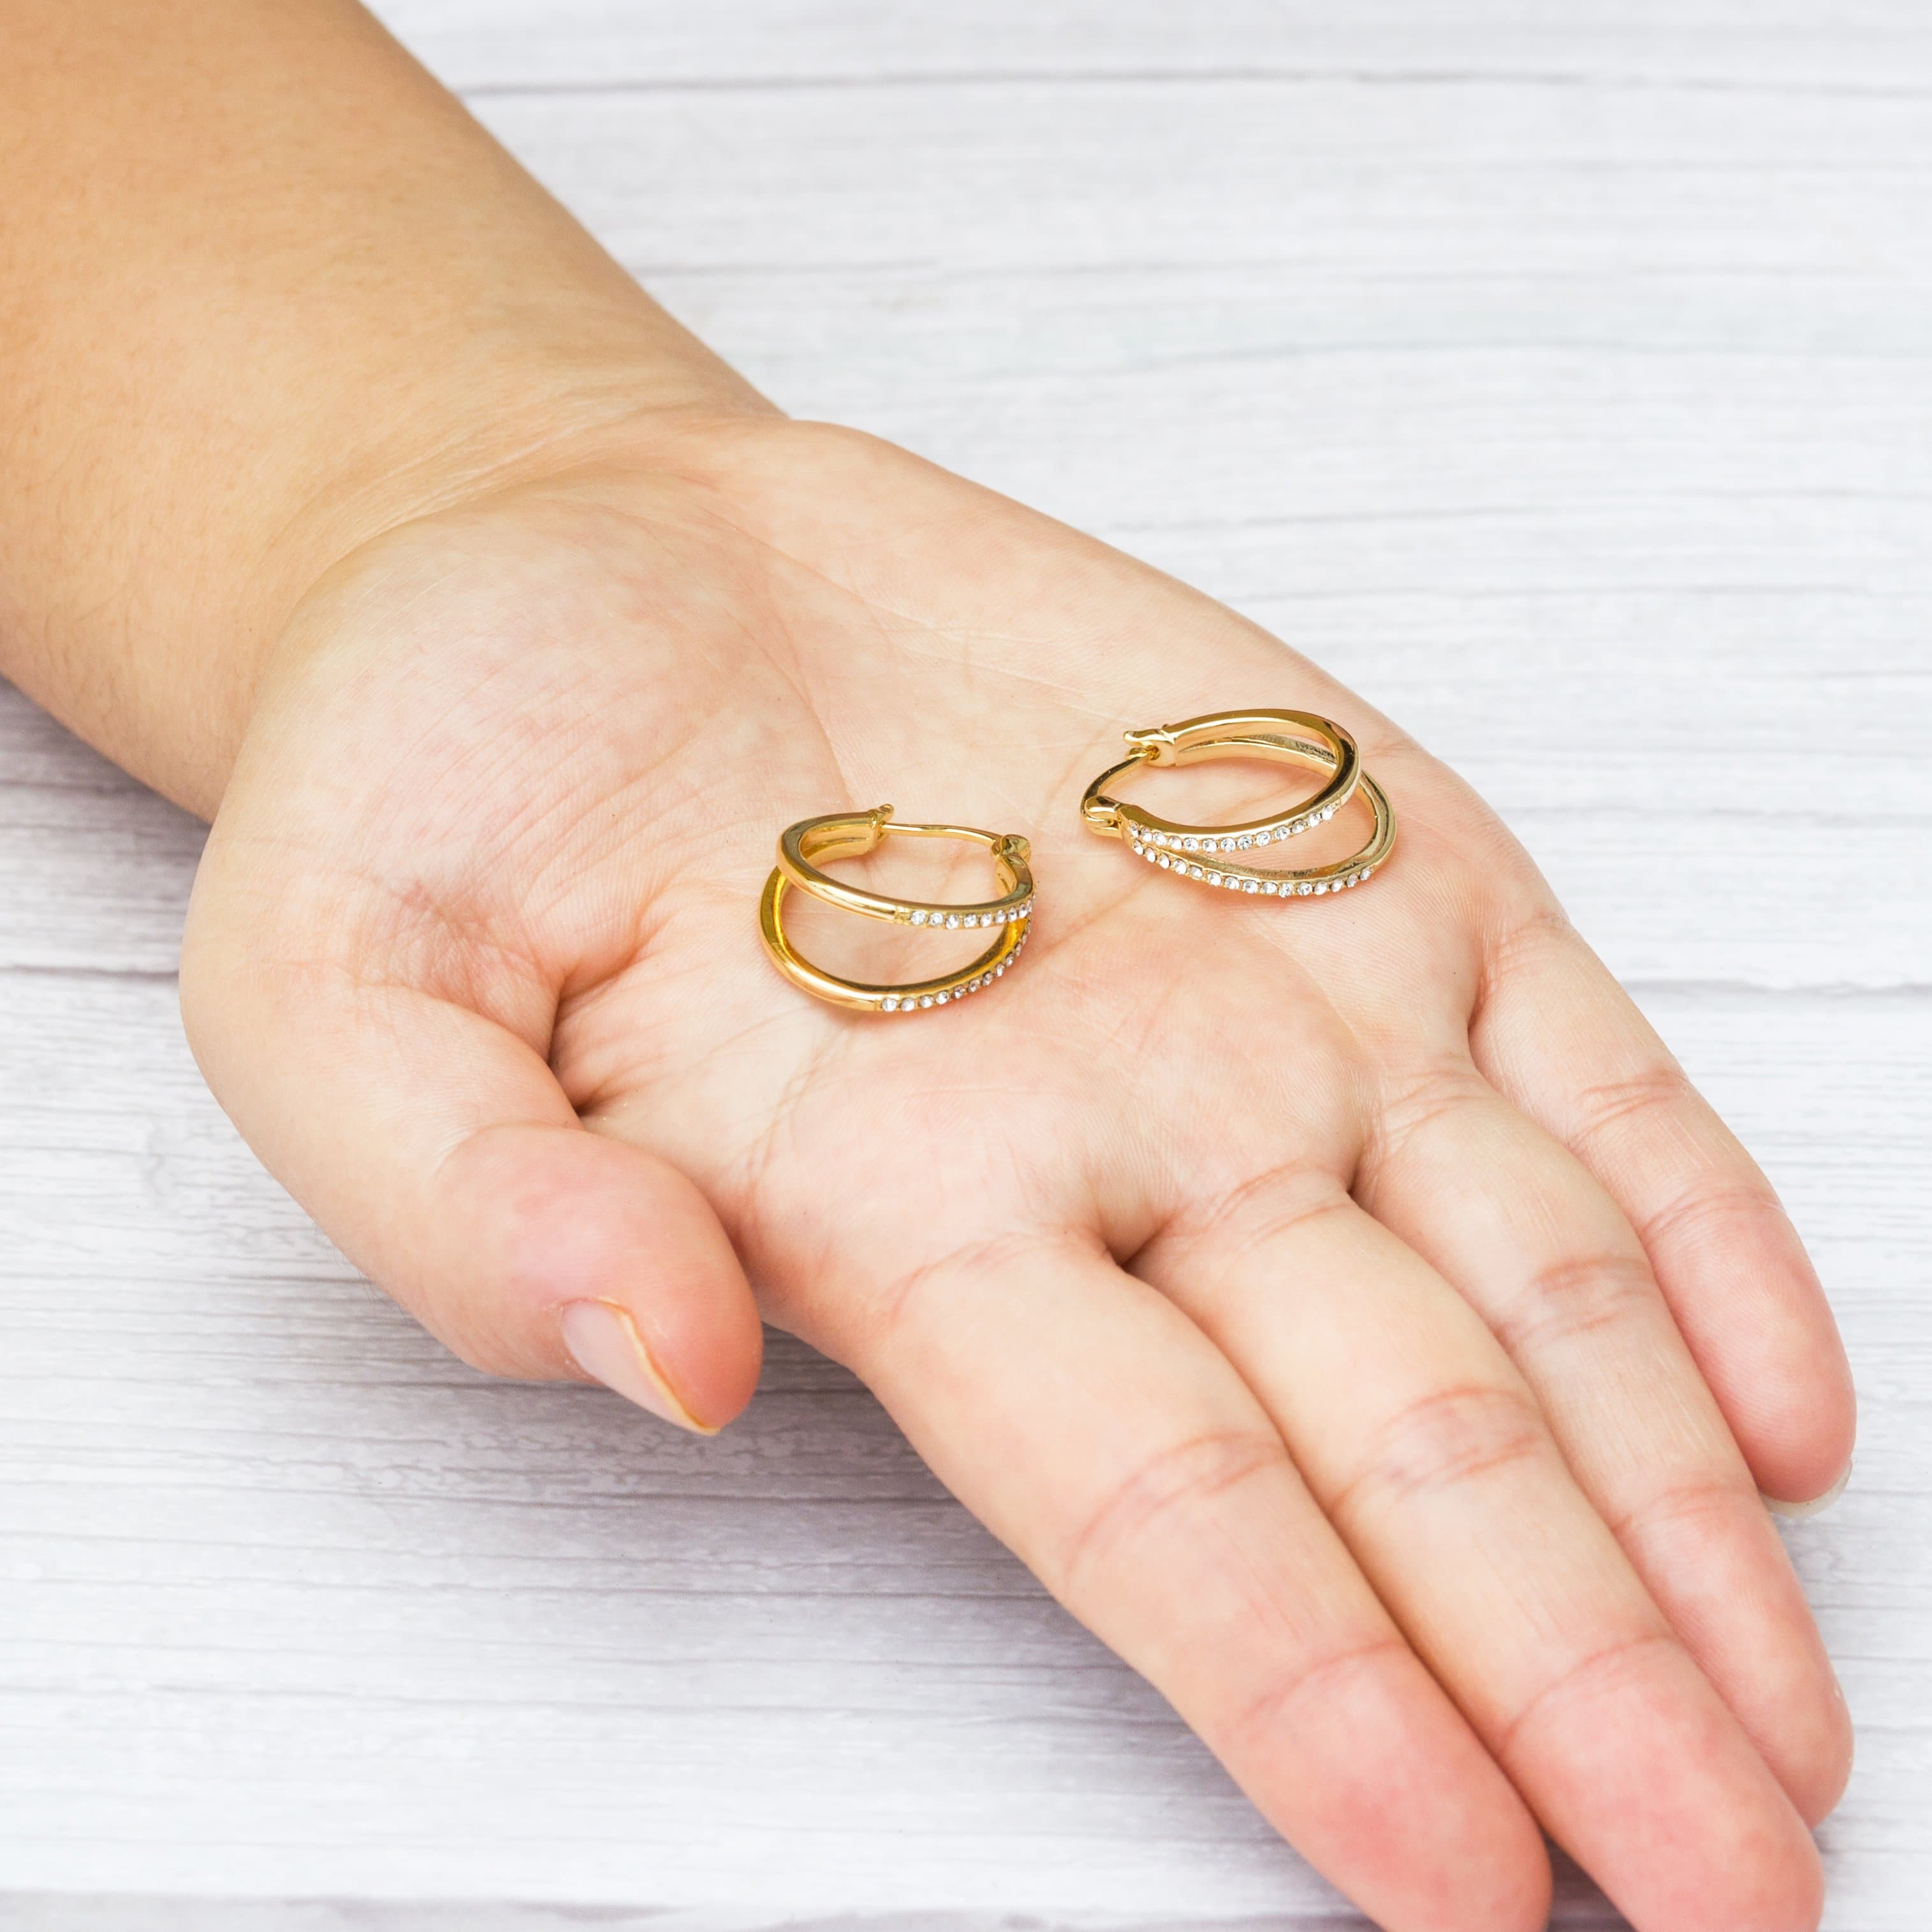 Gold Plated Double Hoop Earrings Created with Zircondia® Crystals